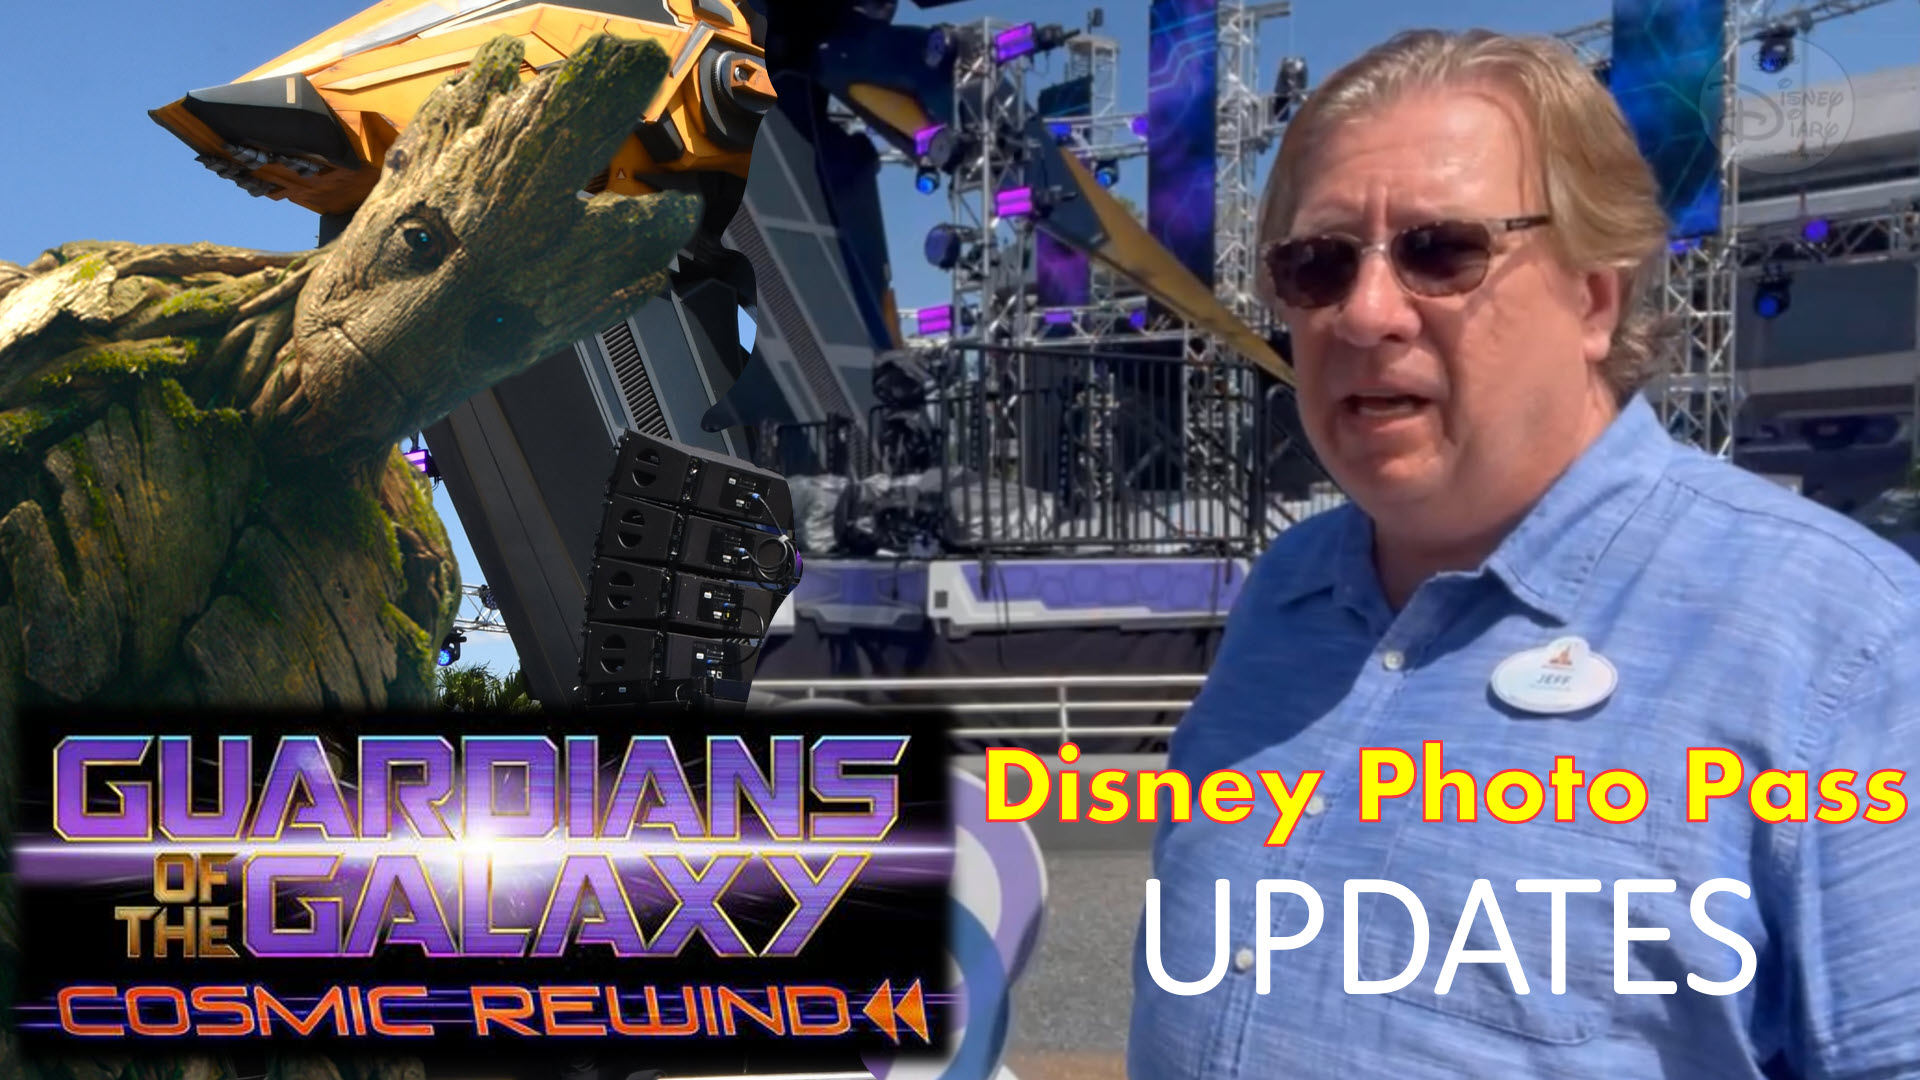 Disney Photo Pass is Ready for Guardians of the Galaxy Cosmic Rewind with Special Magic Shots